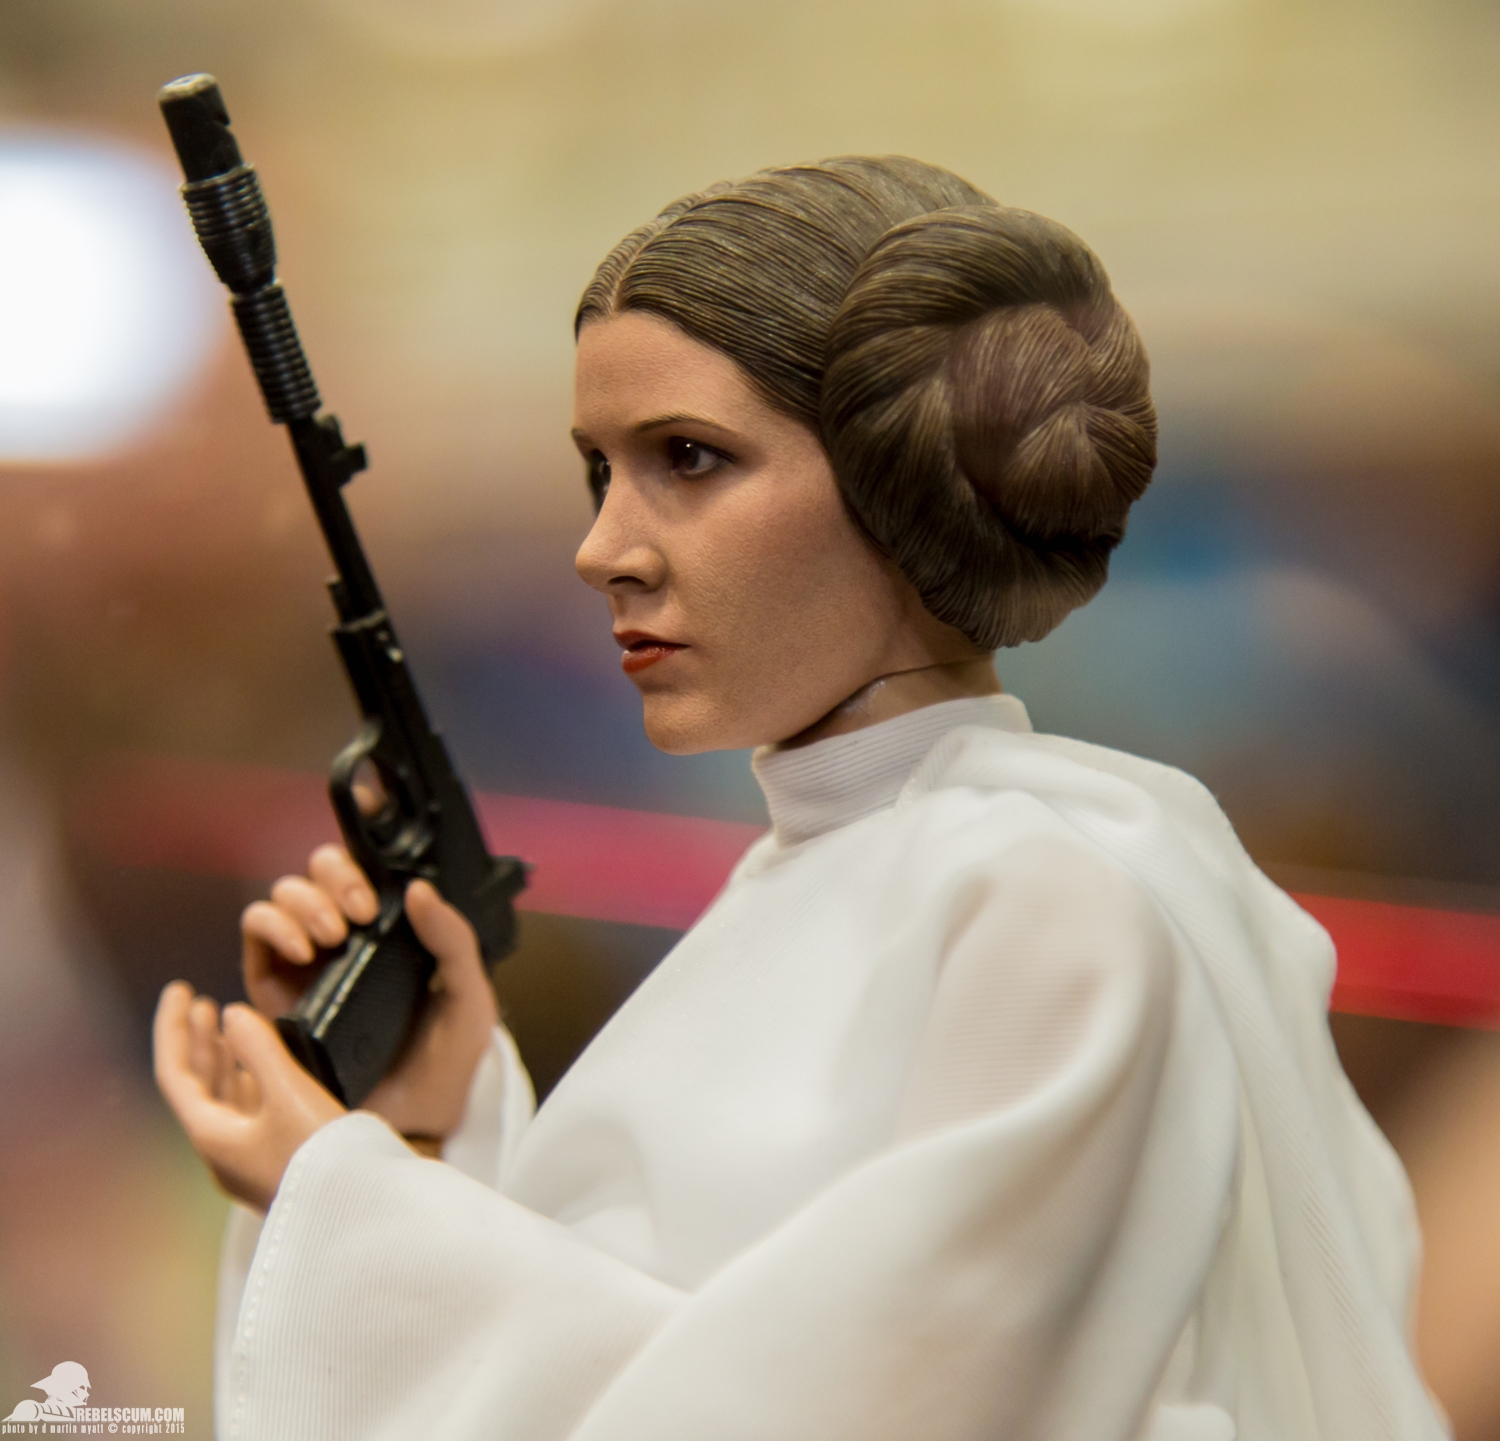 http://www.rebelscum.com/2015-SDCC/Hot-Toys-Display-2015-San-Diego-Comic-Con-SDCC/Hot-Toys-Display-2015-San-Diego-Comic-Con-SDCC-029.jpg